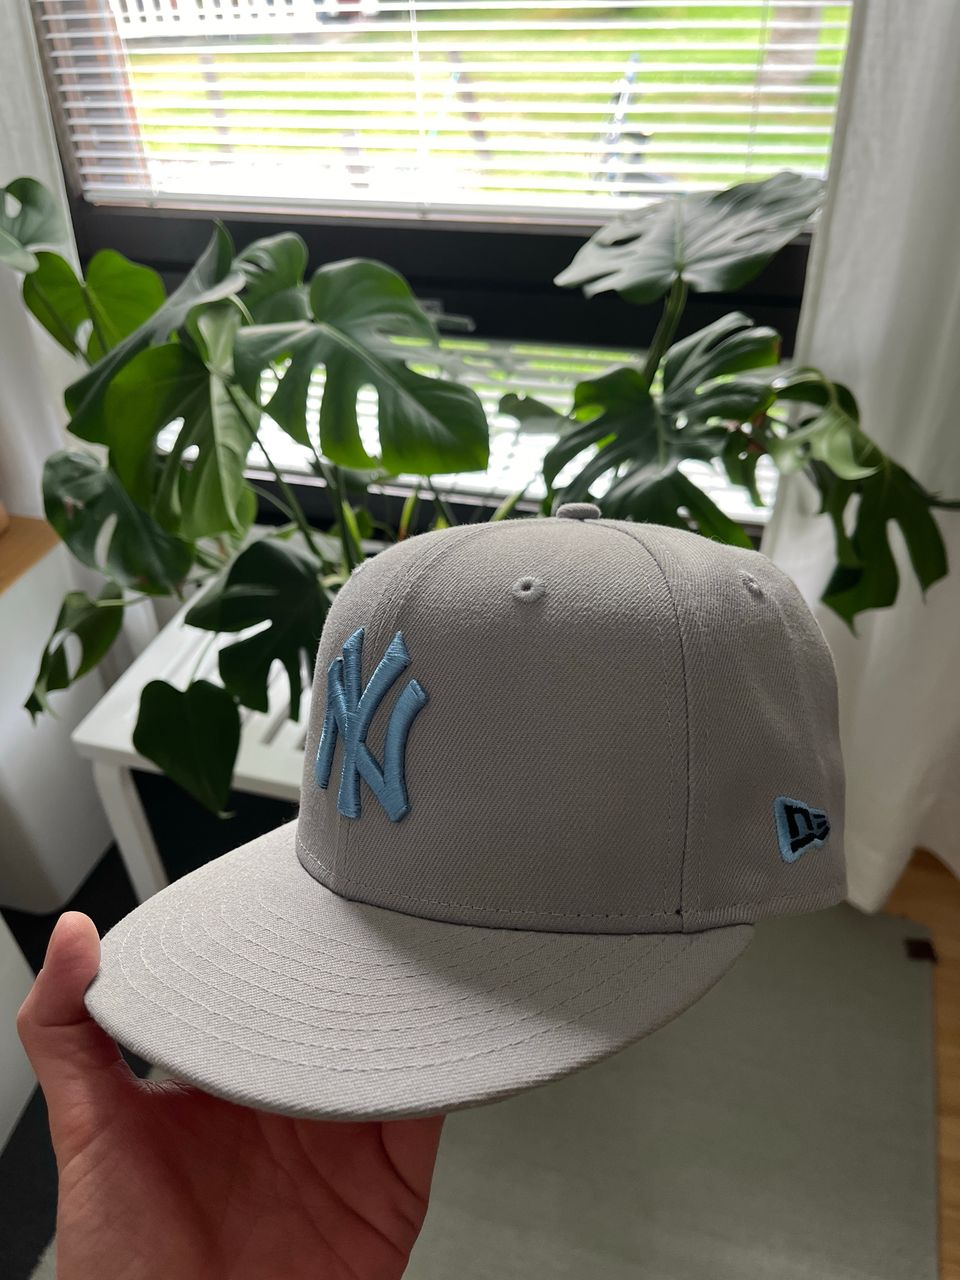 New Era fitted 57,7 cm